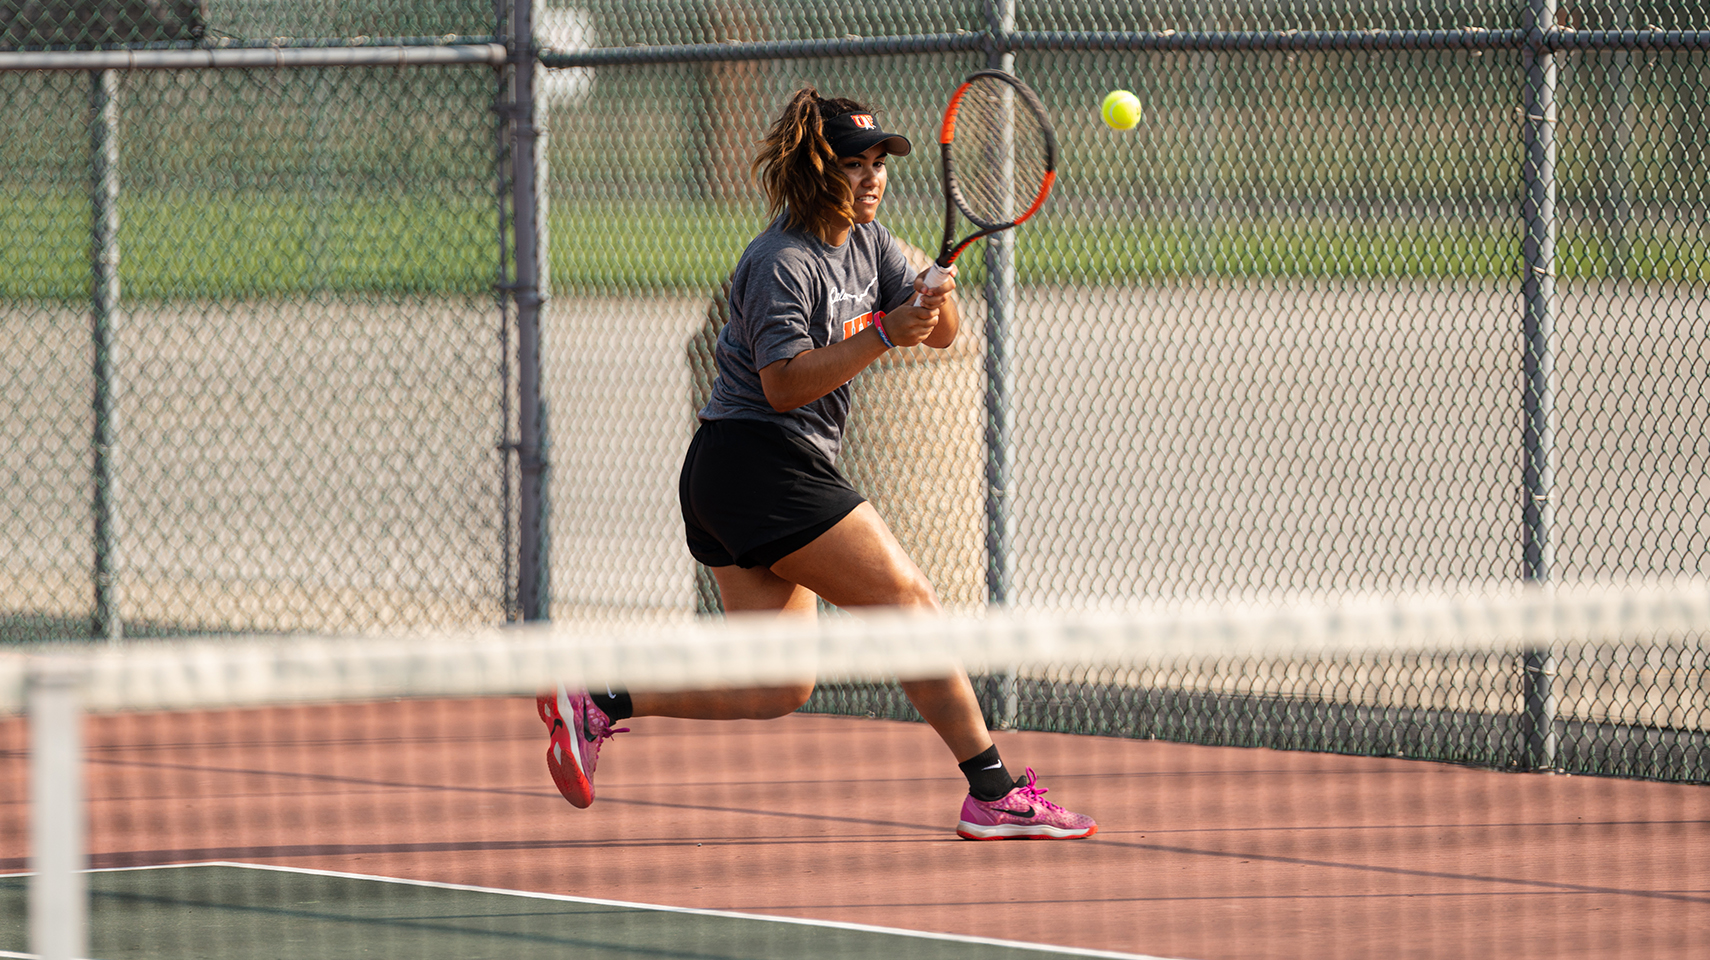 Women's tennis player in gray returning a serve